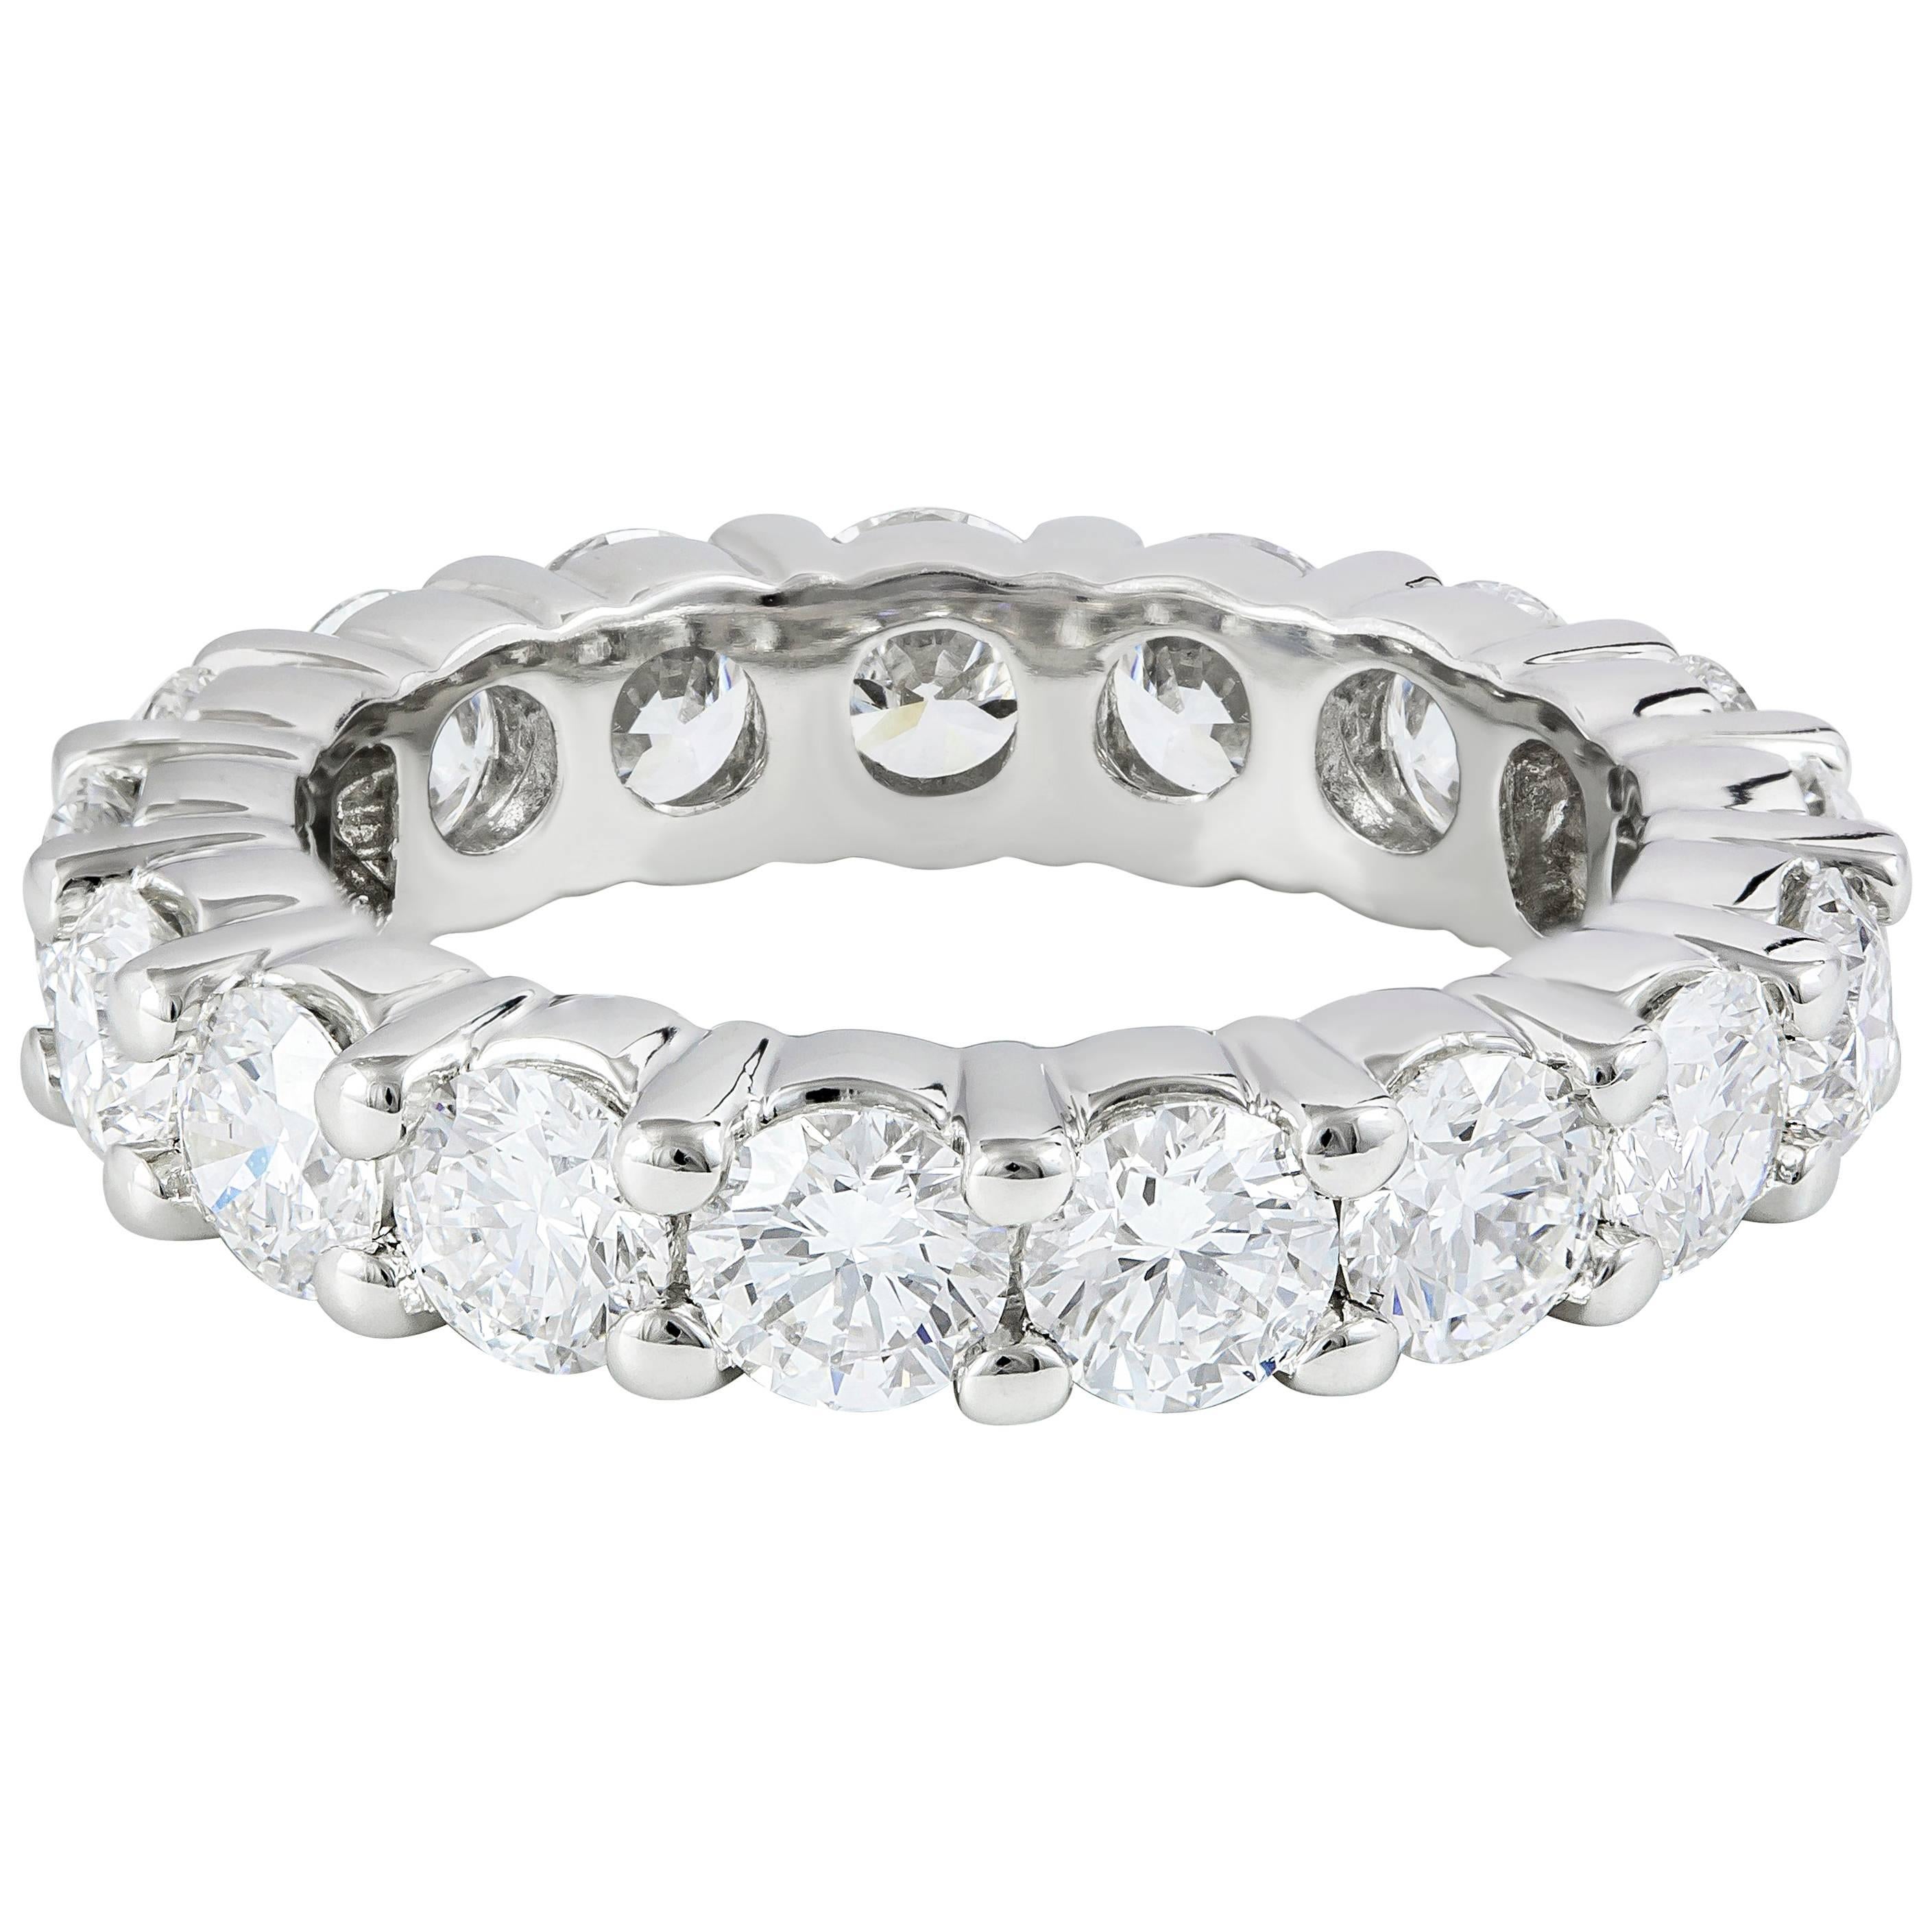 GIA Certified 3.91 Carat Total Round Diamond Eternity Wedding Band Ring For Sale